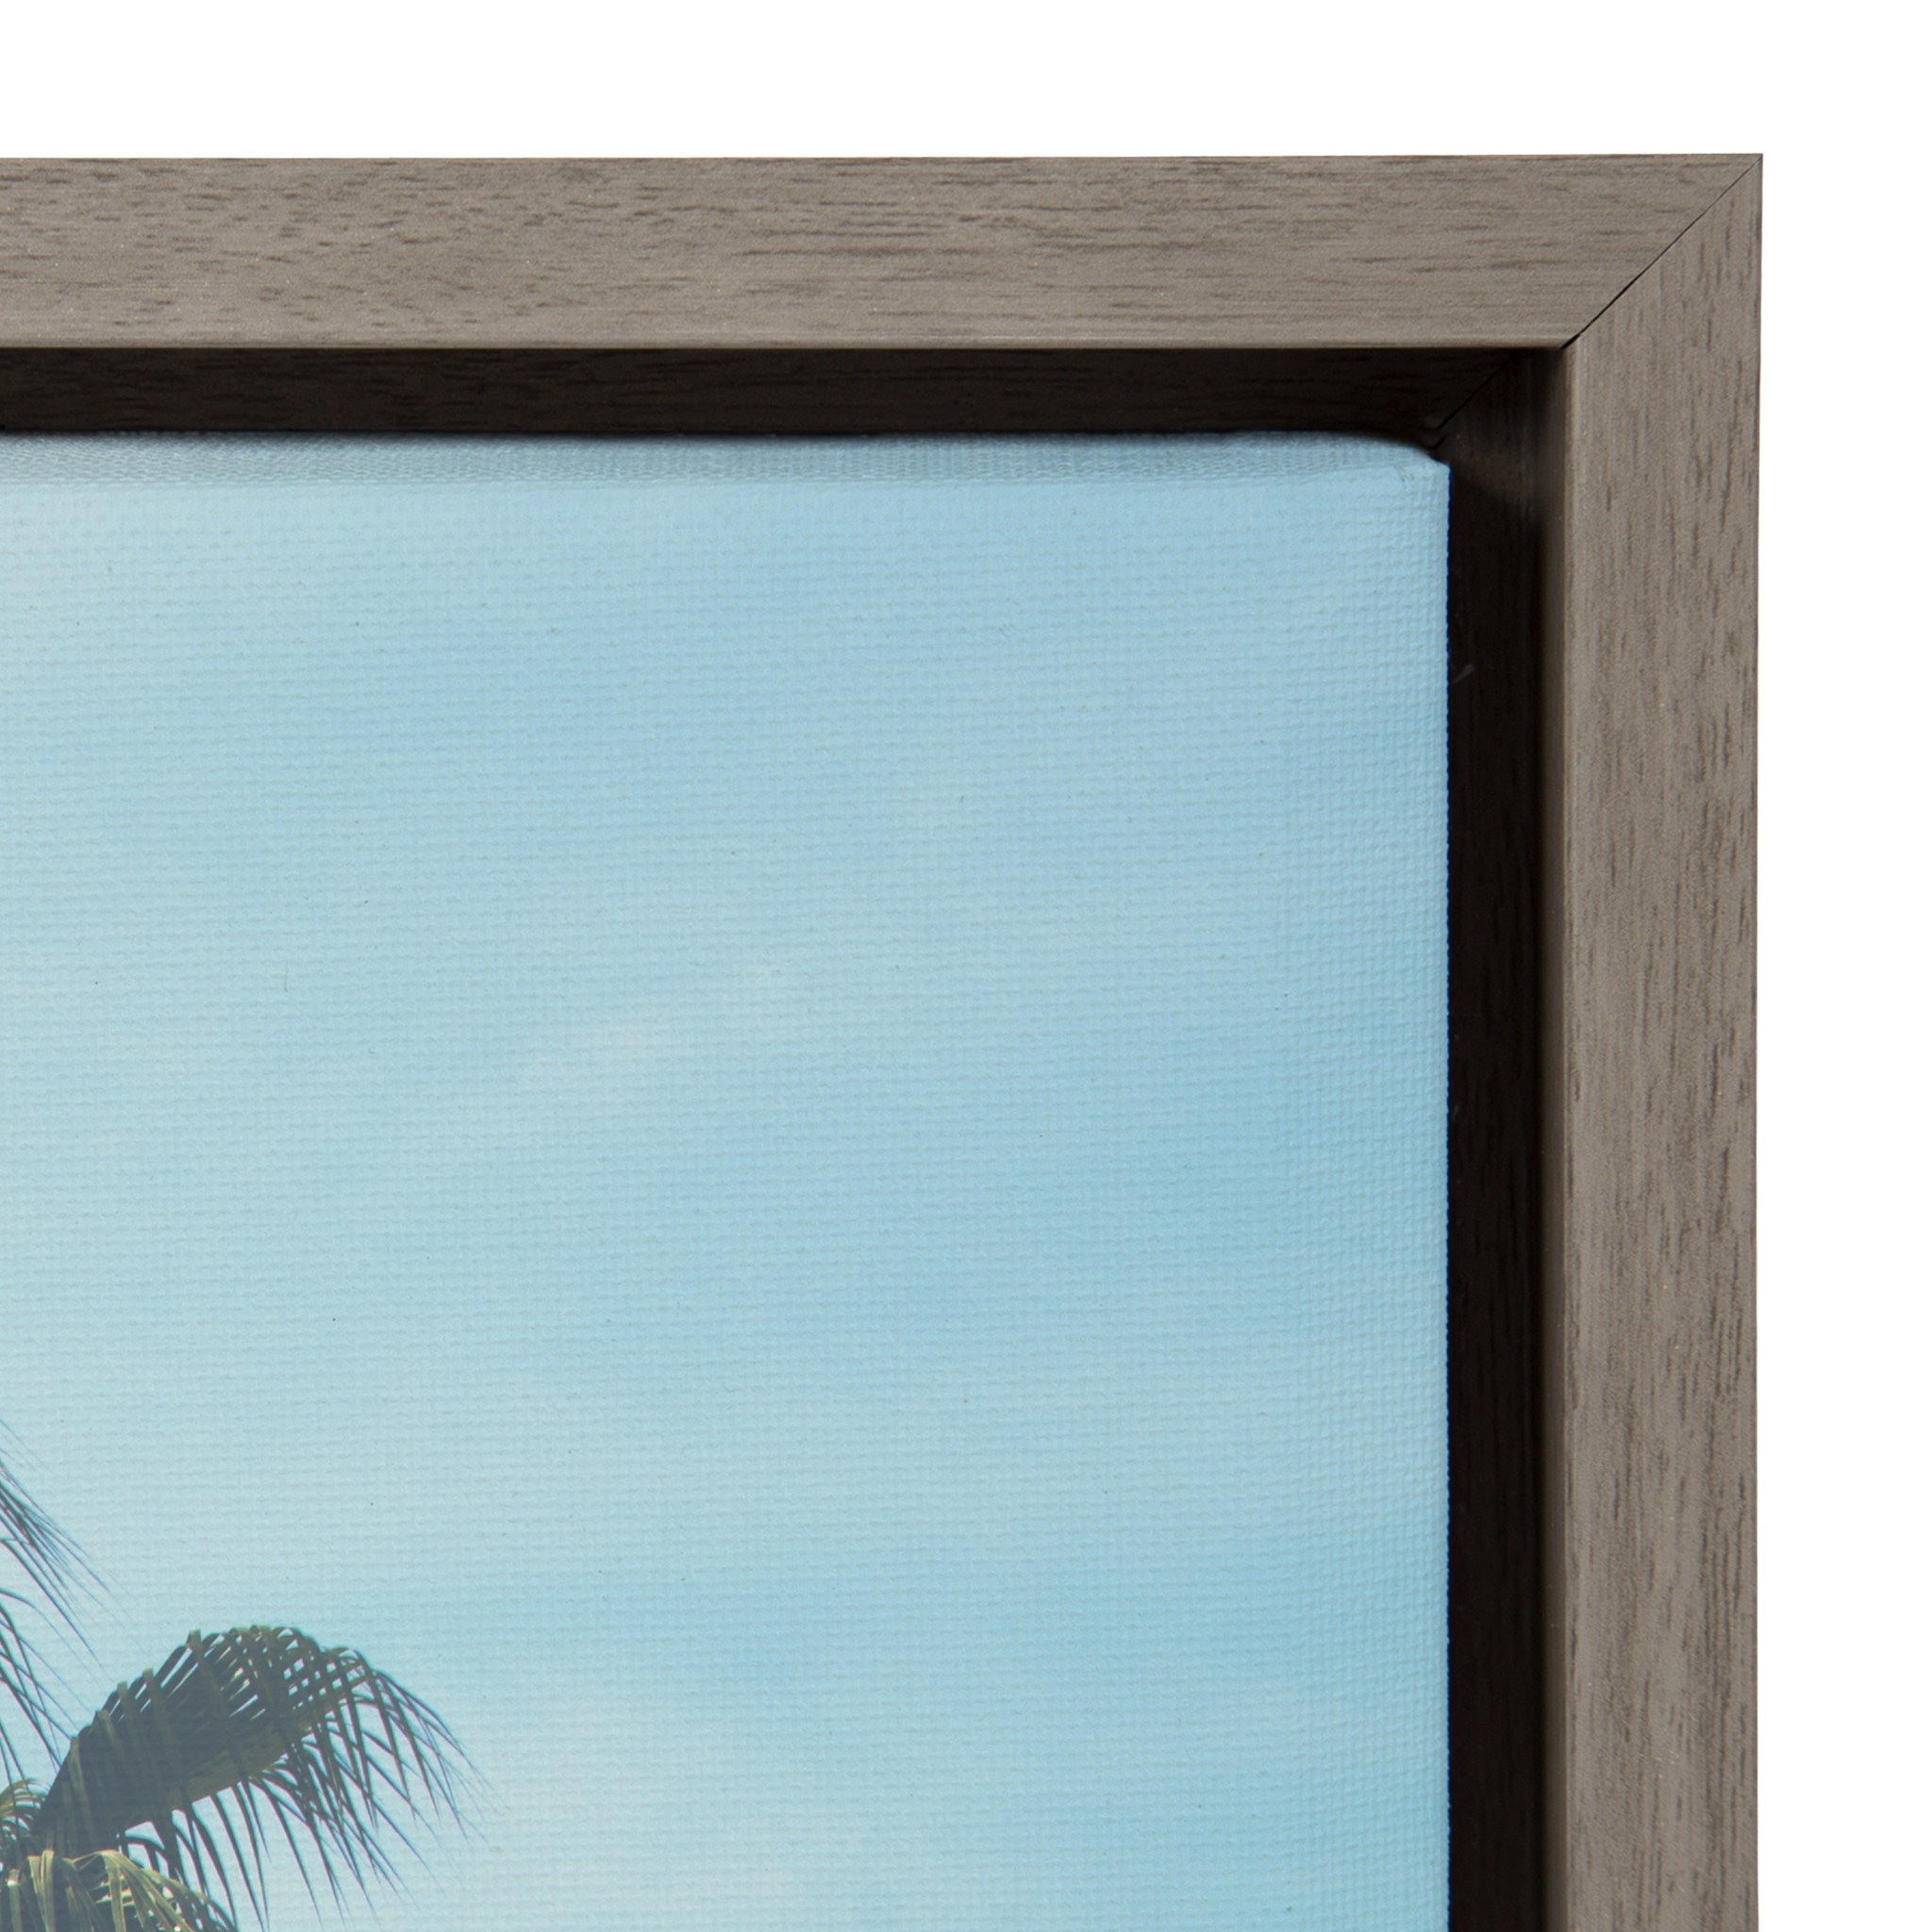 Sylvie The Palm Trees and The Boat Framed Canvas by Laura Evans